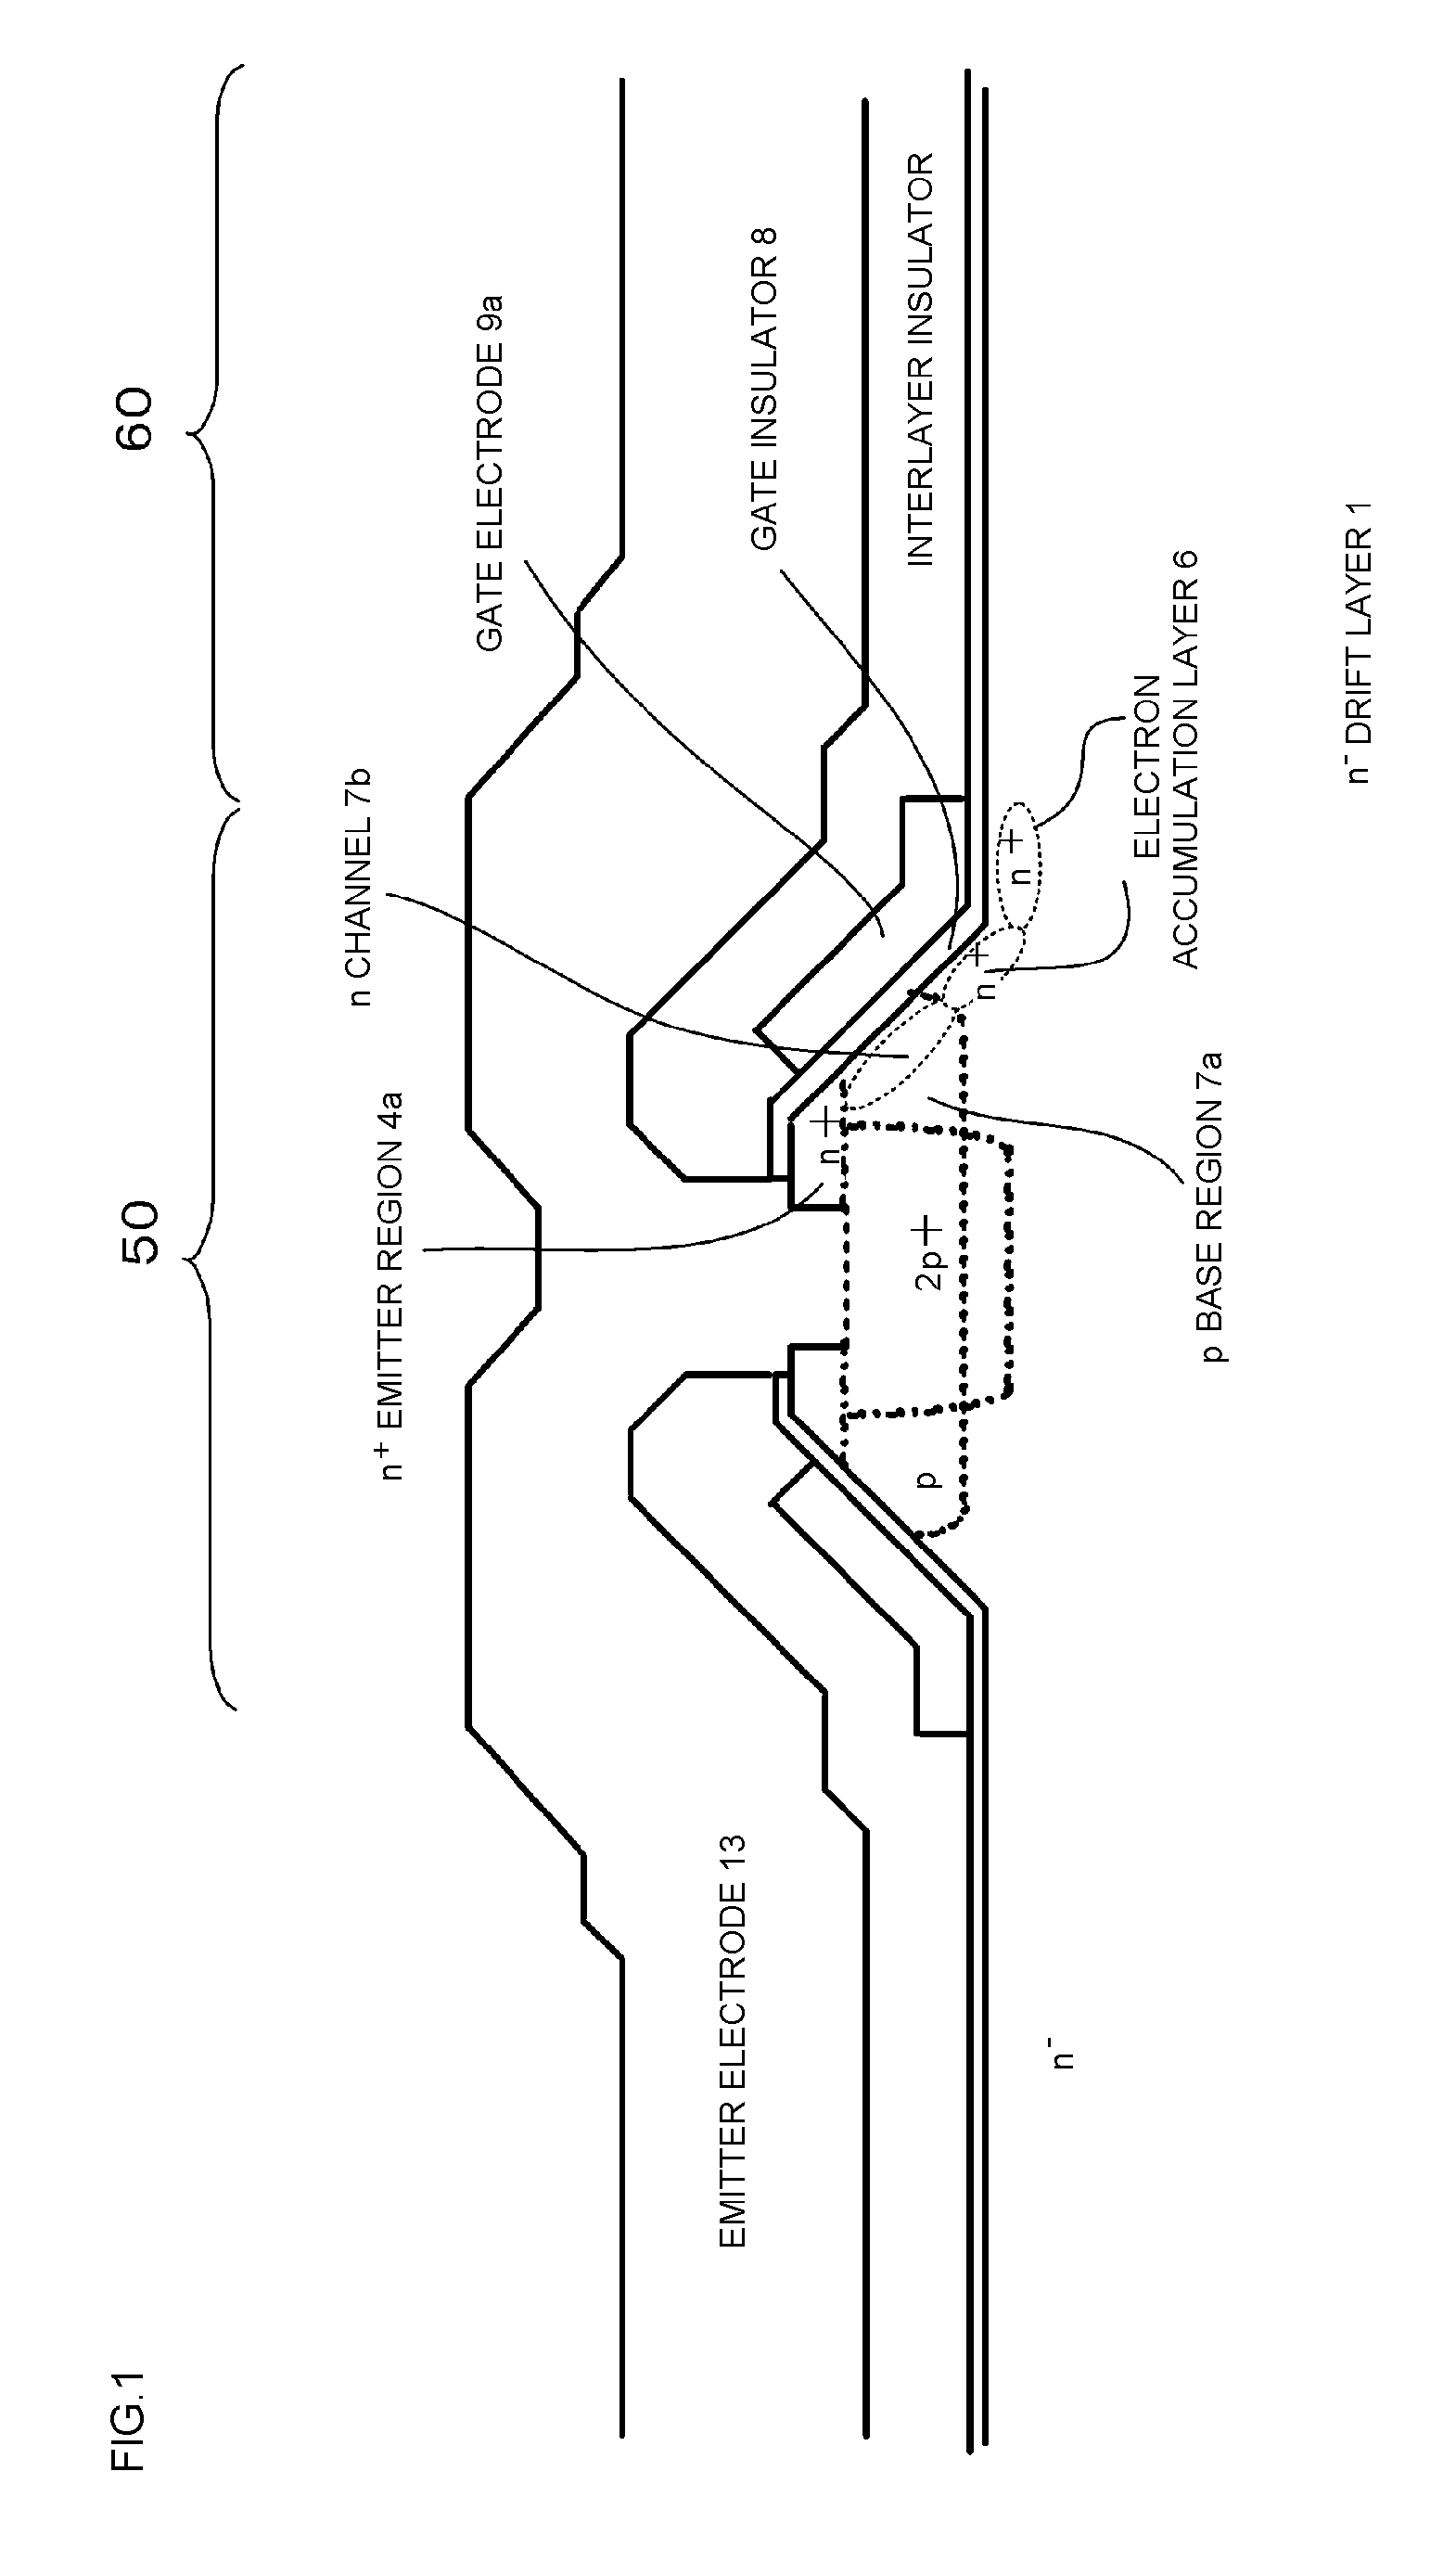 MOS type semiconductor device